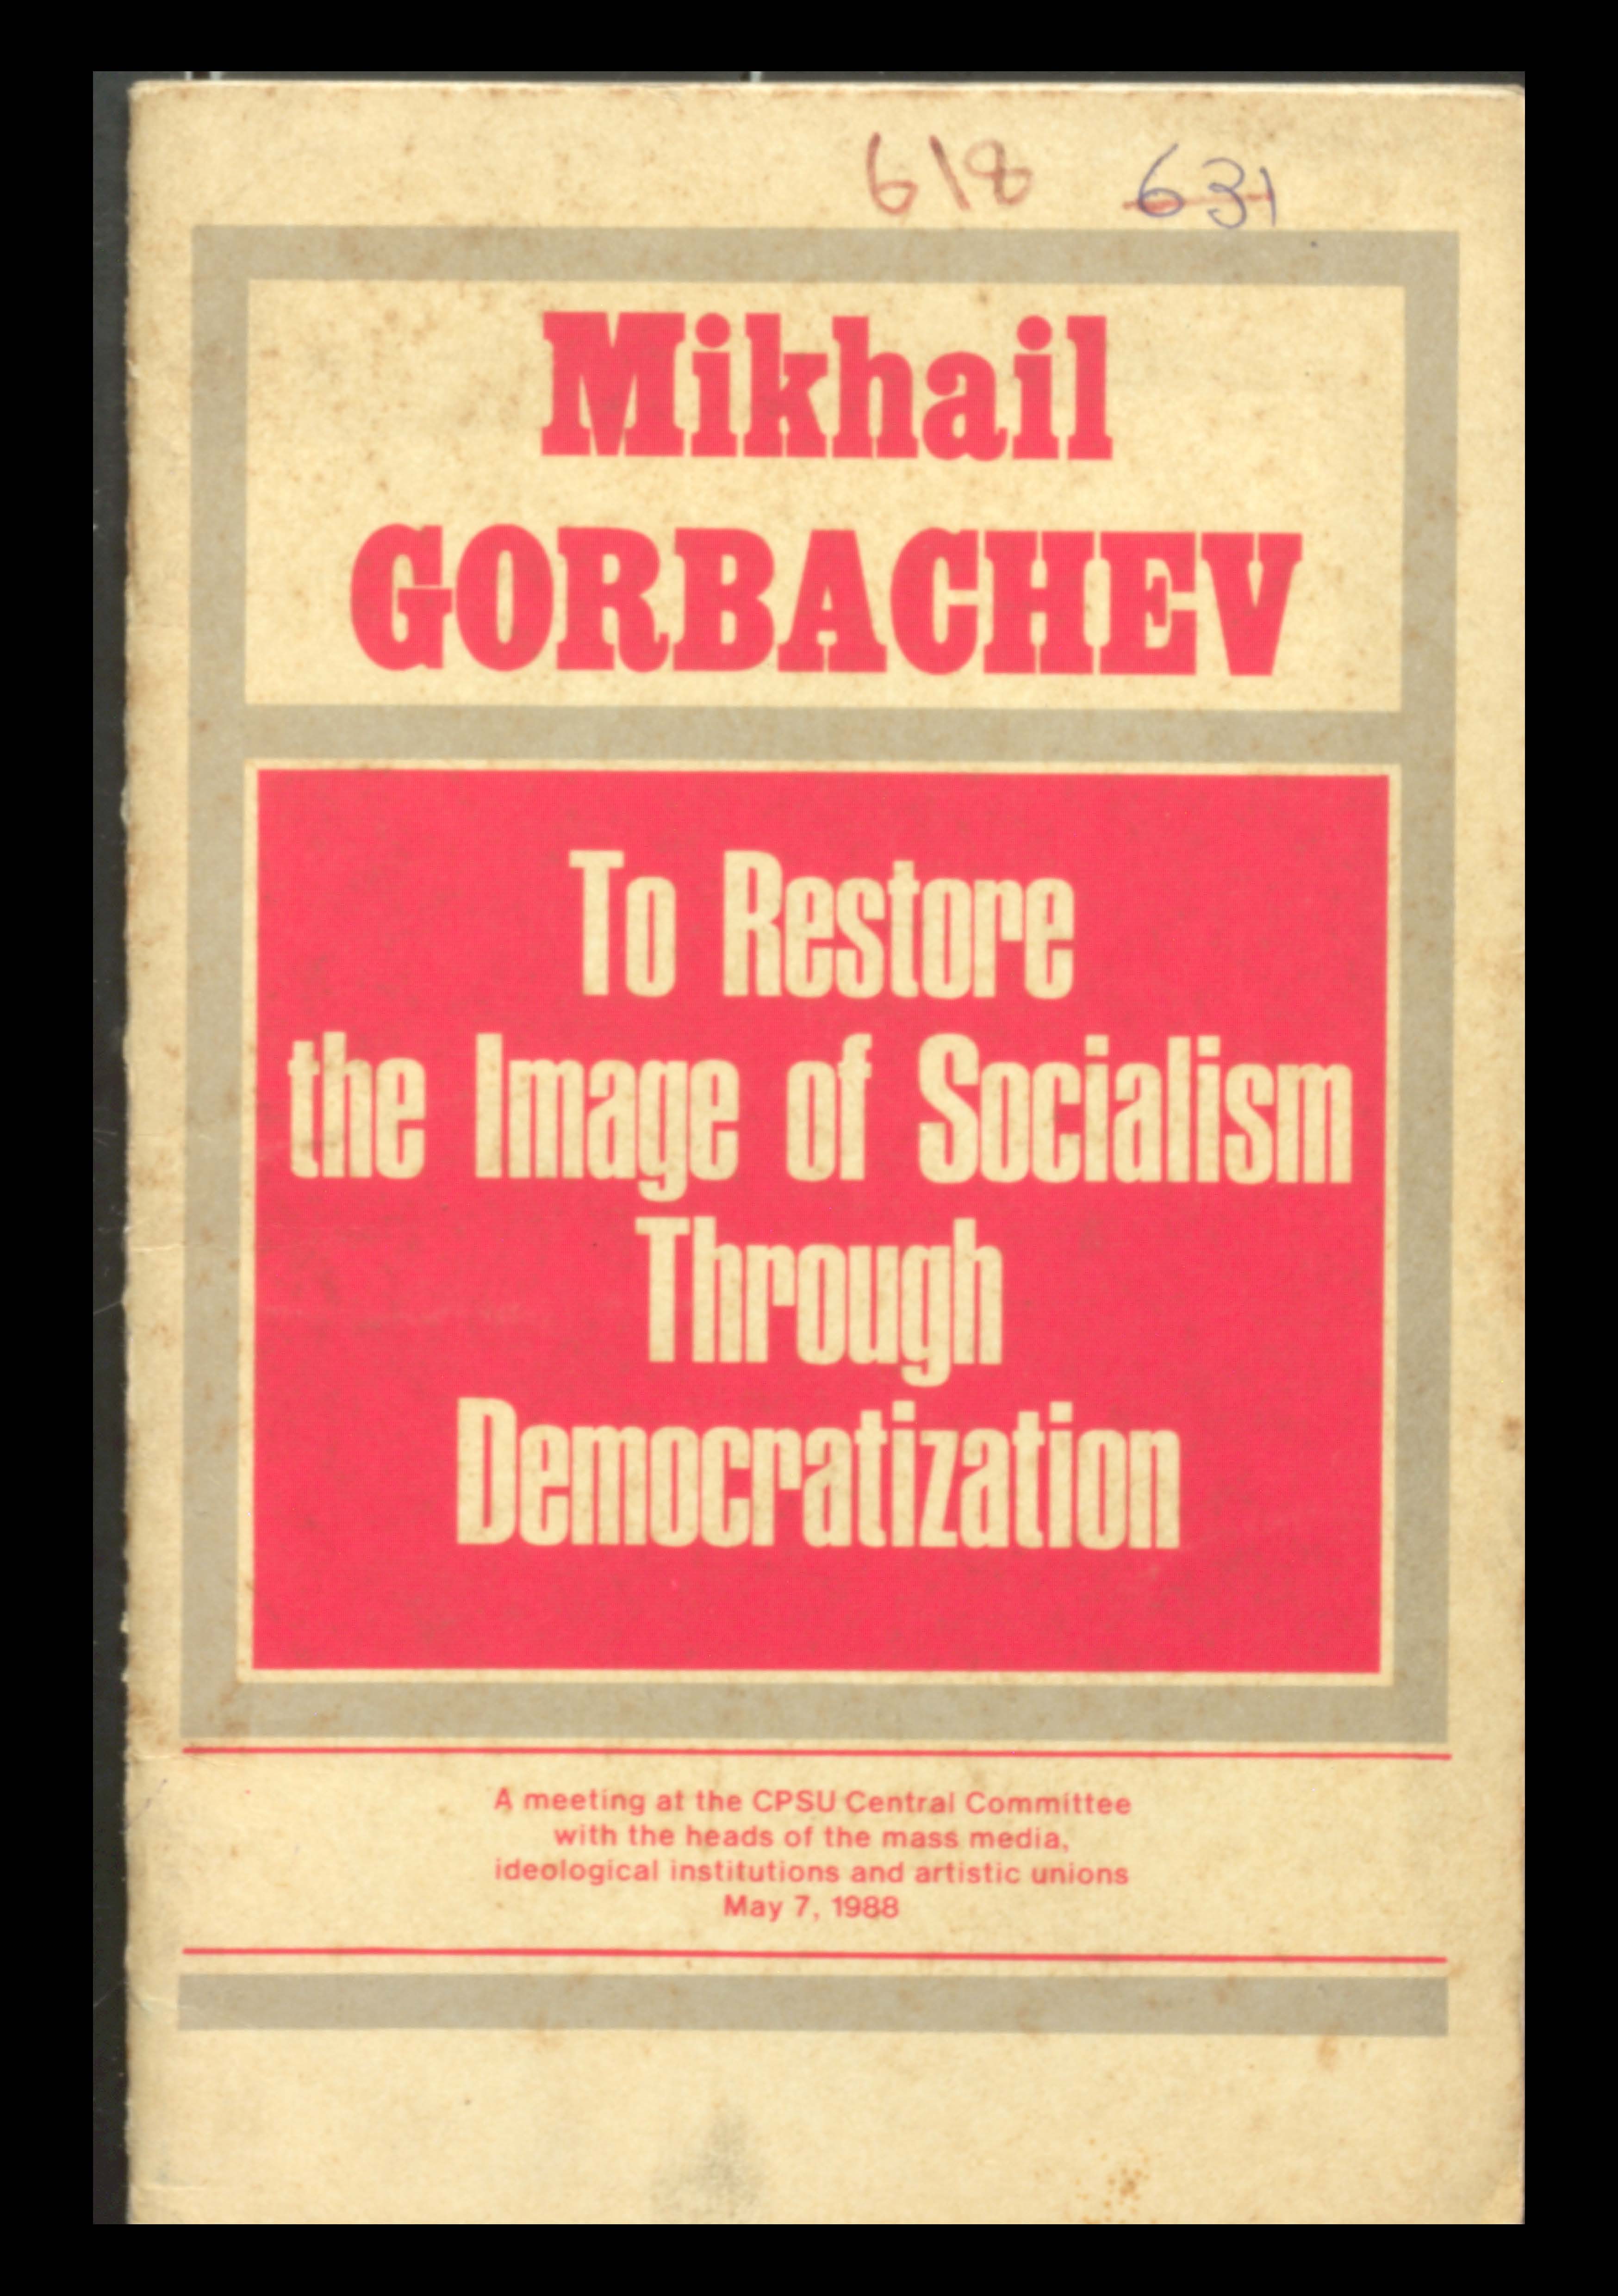 To restore the image of socialism through democratization